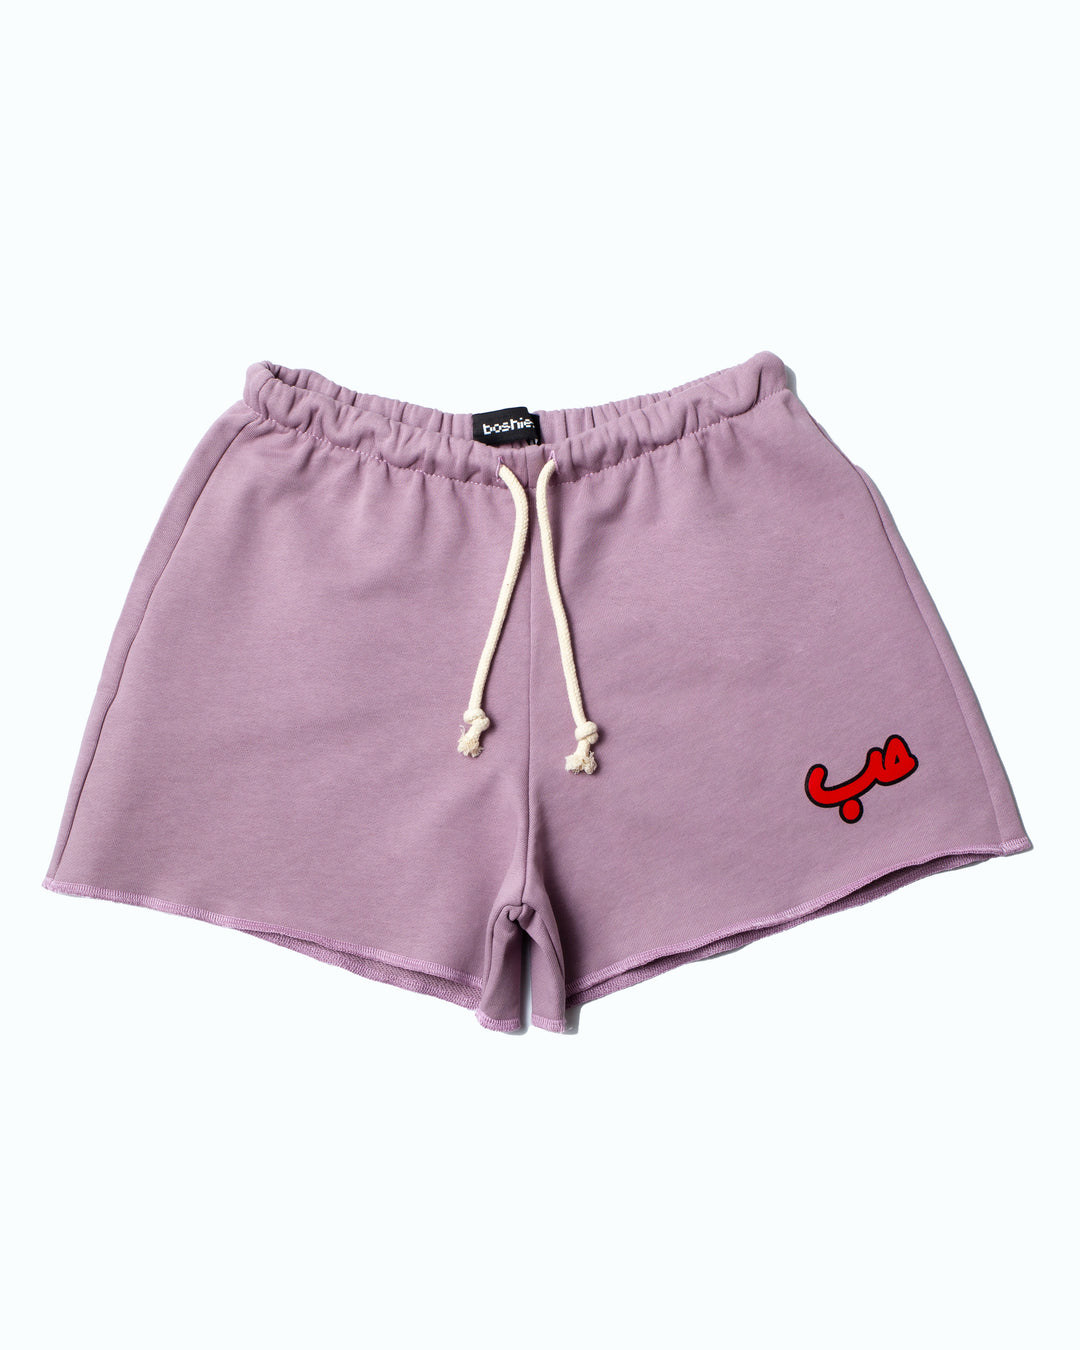 Flared Lavender Short with Hobb written in Arabic حب and printed in red silkscreen on the side of the short.